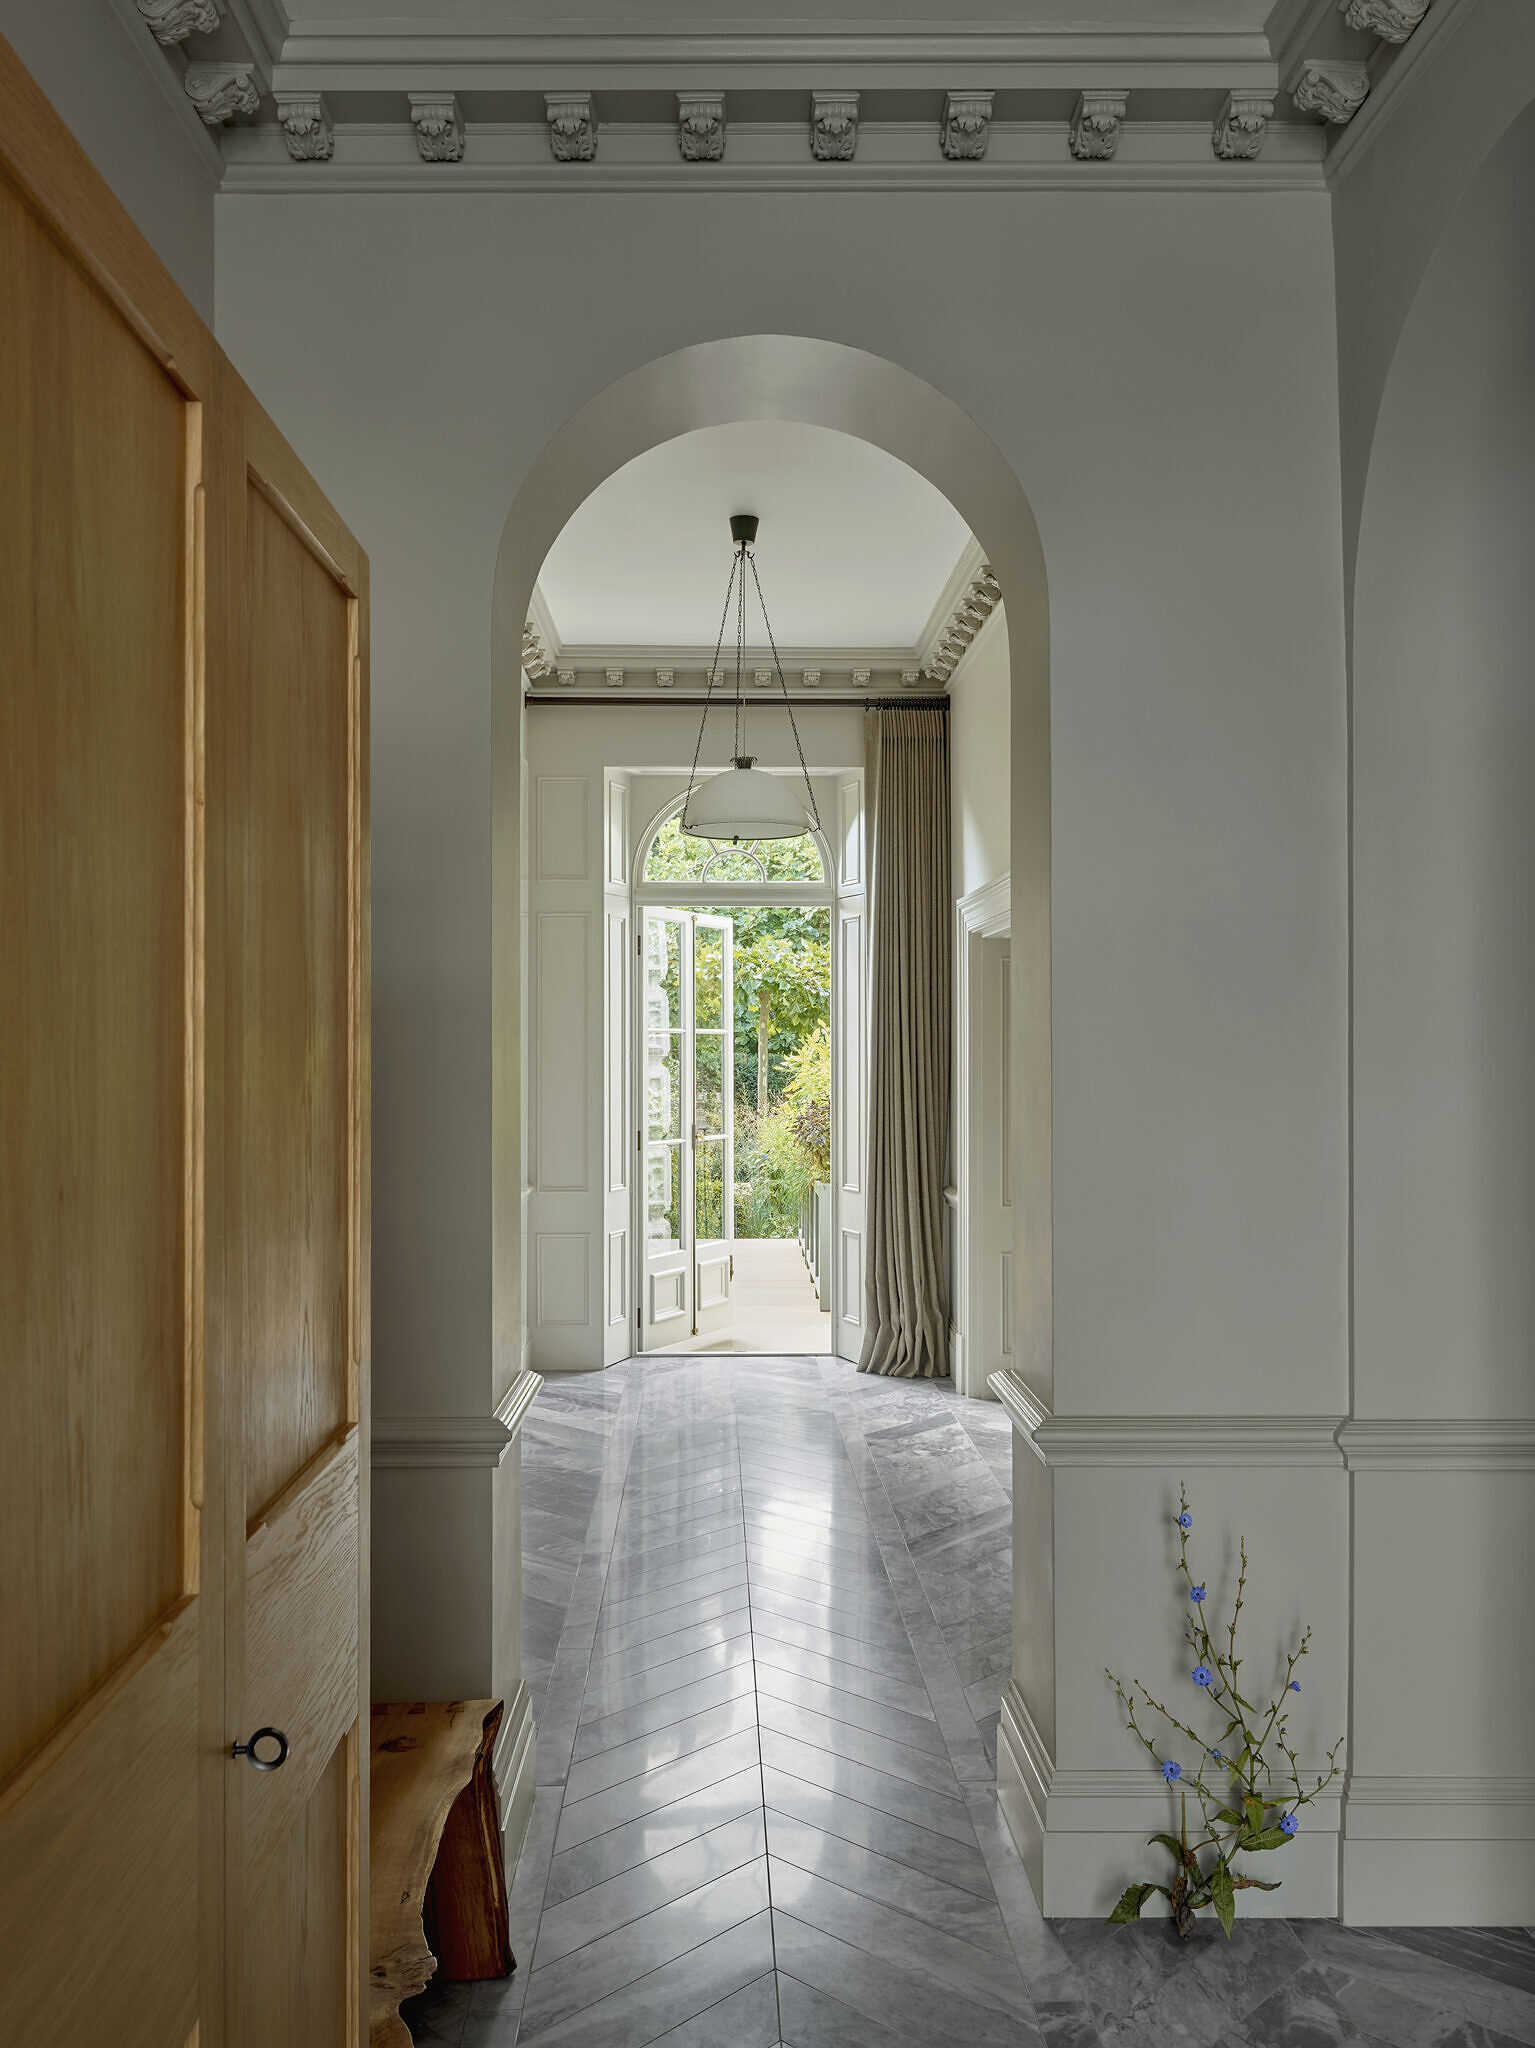 Hallway in the home with a wooden cabinet to the left side, and some flowers on the floor. The door on the opposite side of the image leads to a walkway outside.